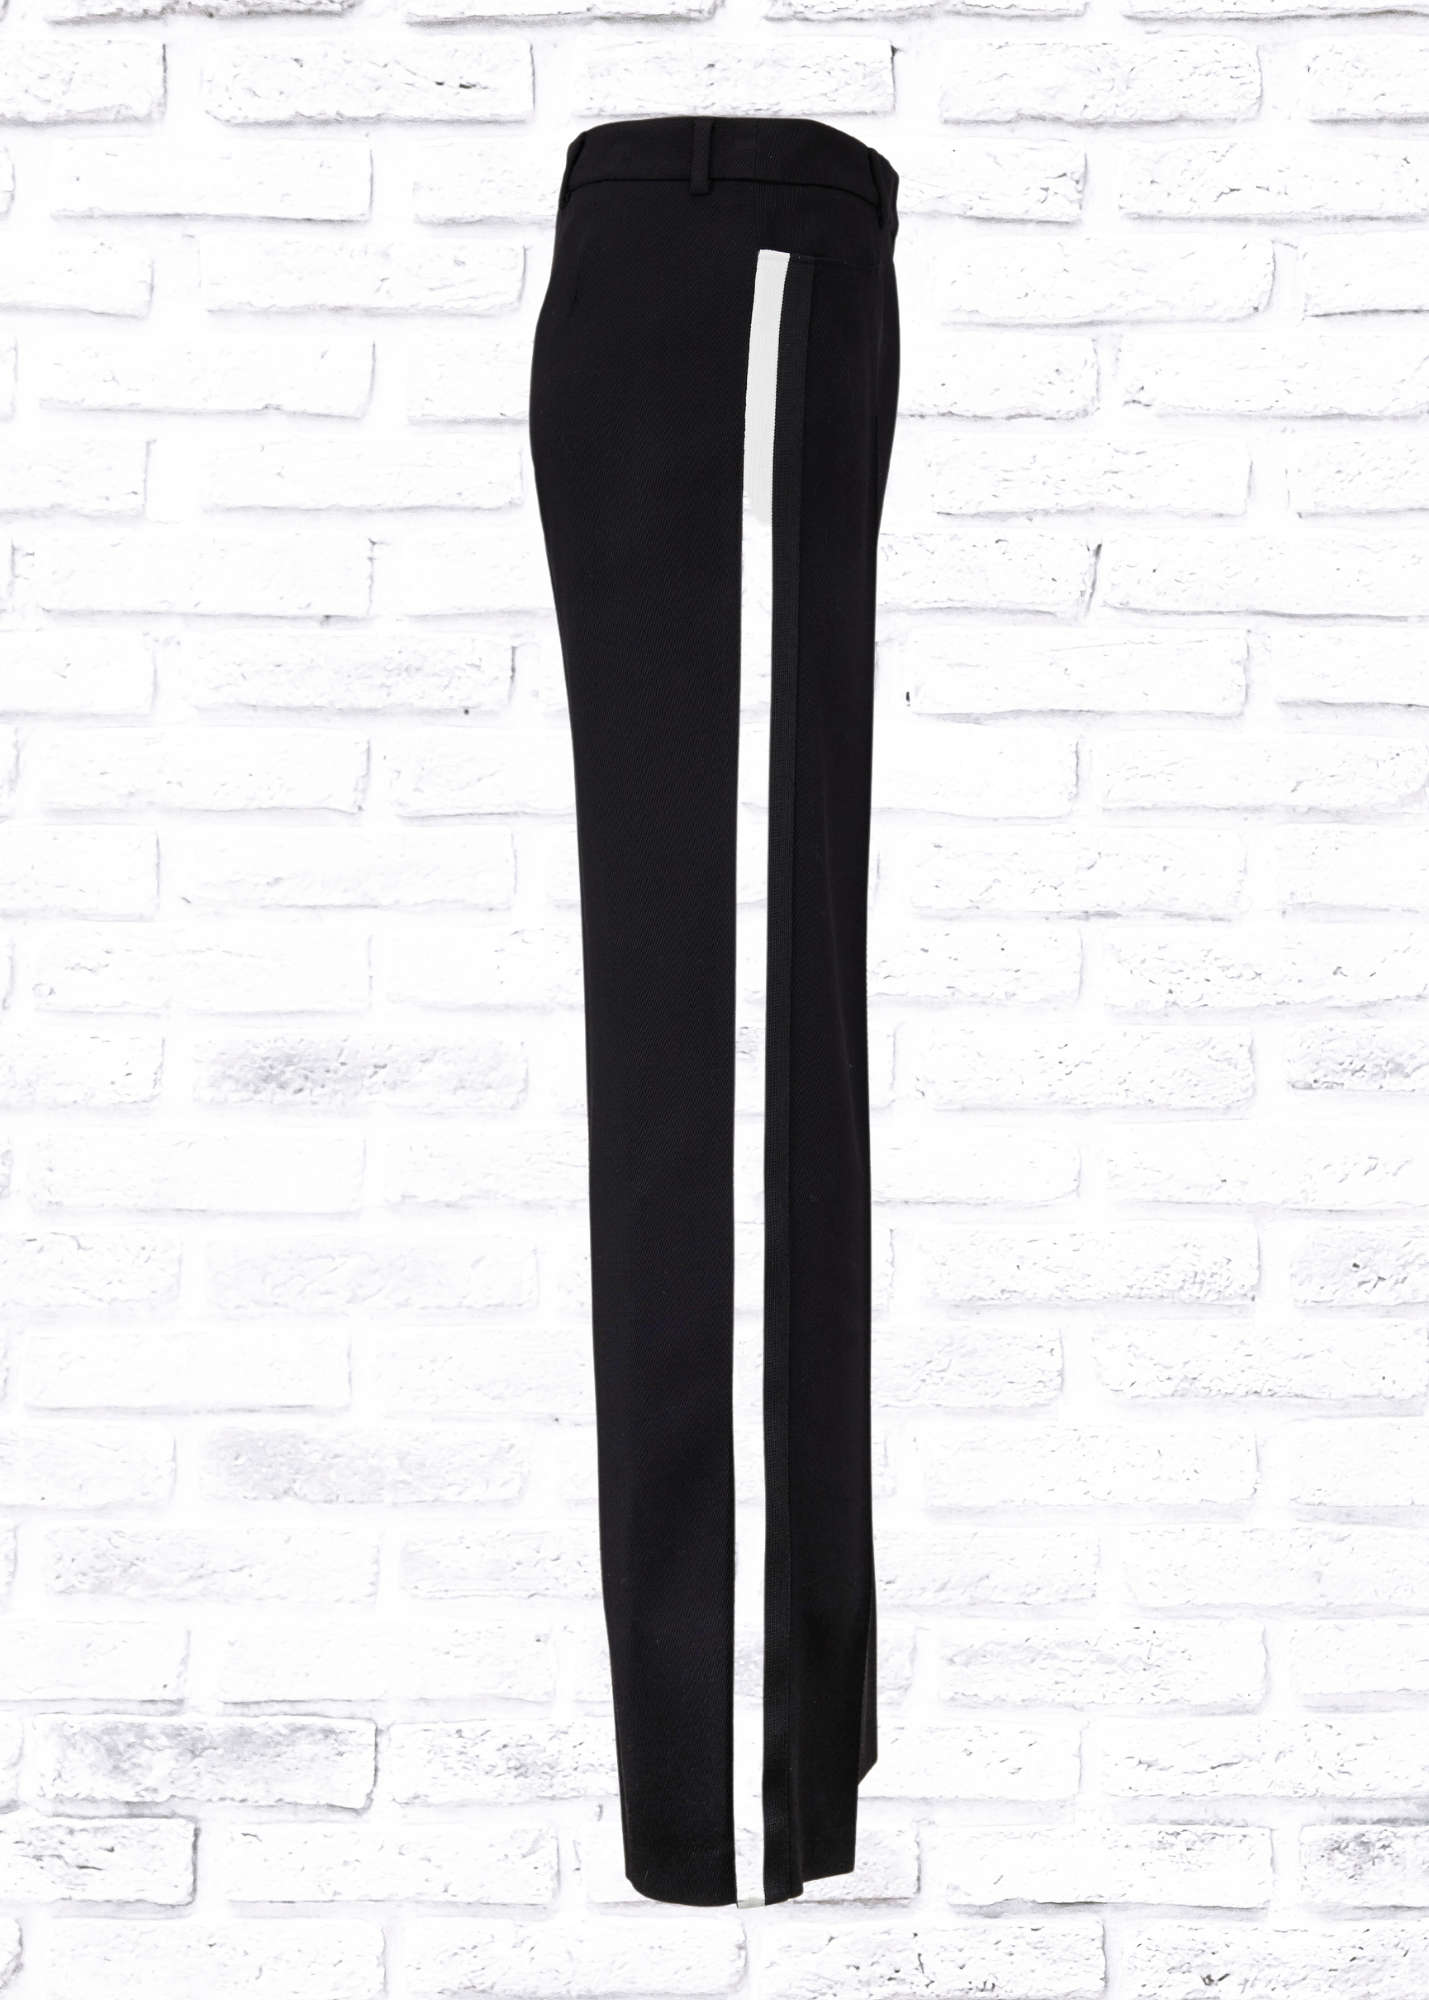 H&M+ Side-striped trousers - Black/White - Ladies | H&M IN